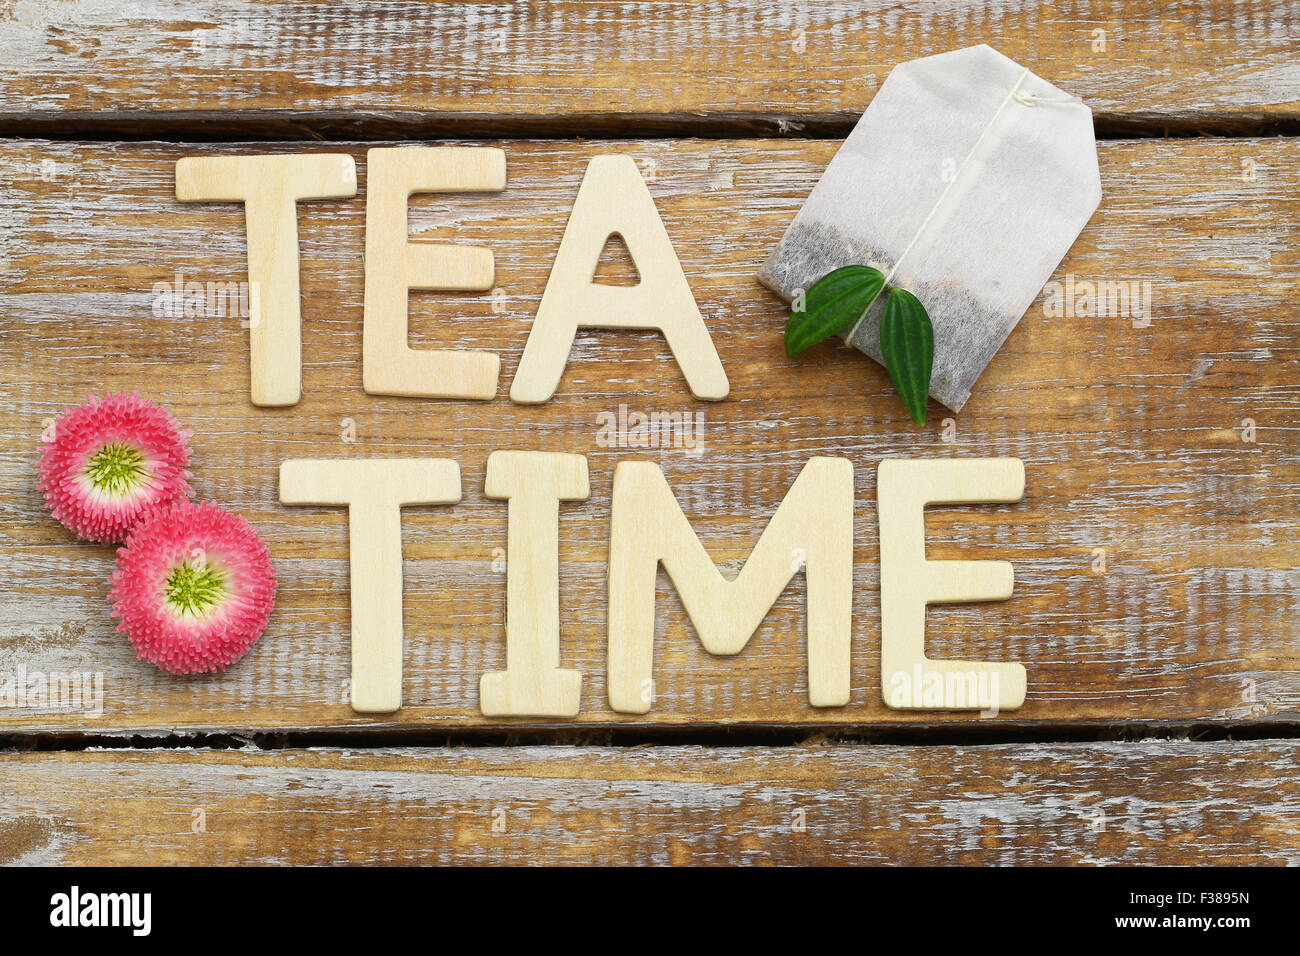 Tea time written with wooden letters on rustic surface Stock Photo